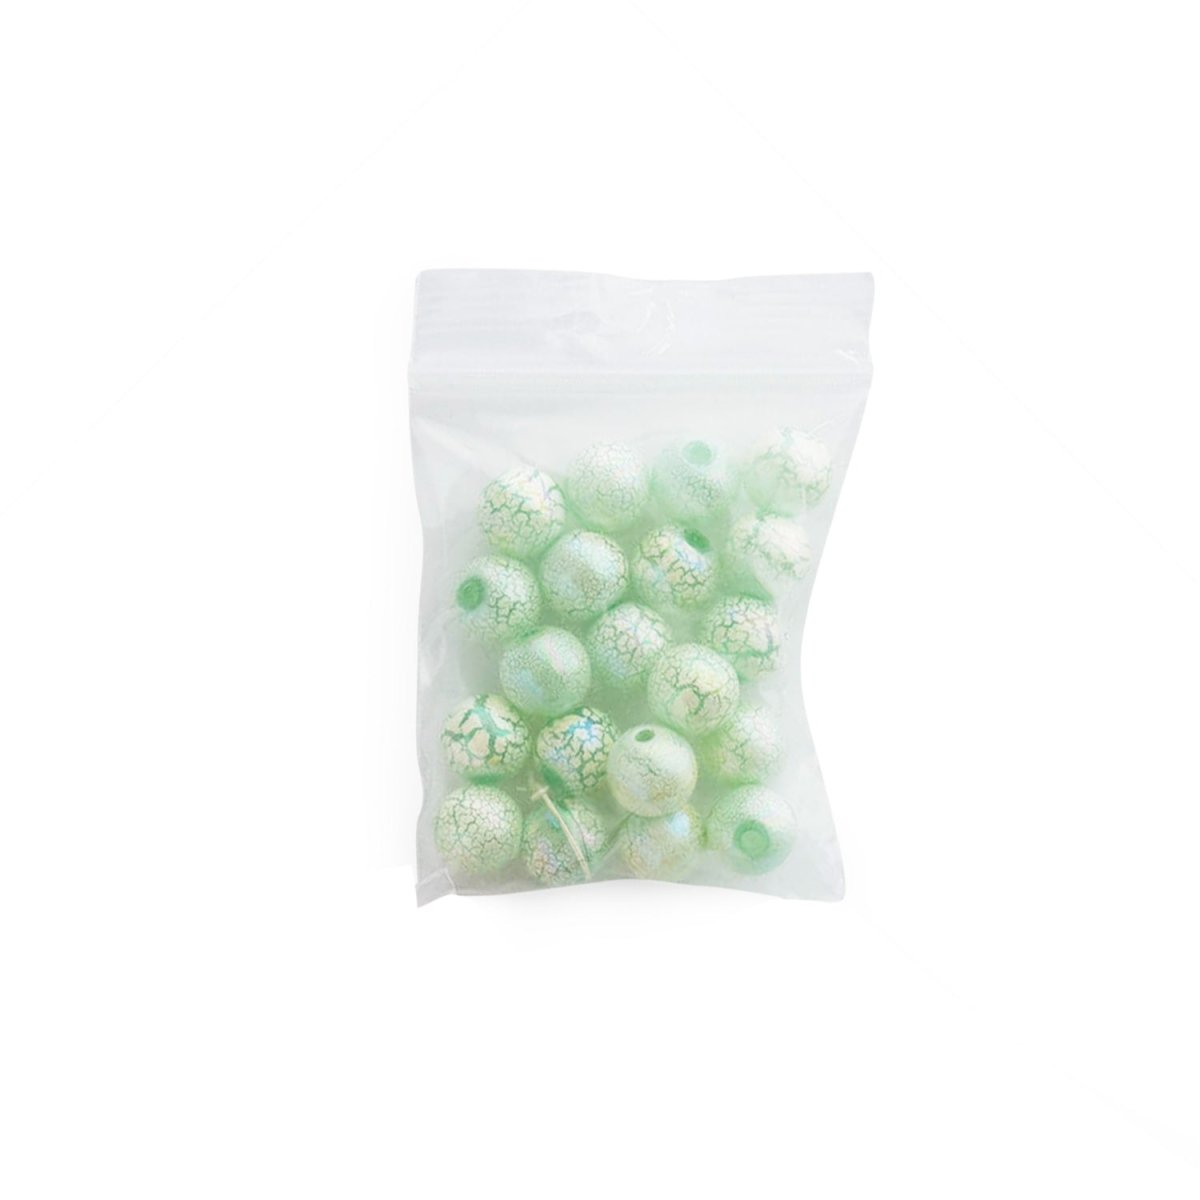 Acrylic Round Beads Crackled Paint Green AB from Cara & Co Craft Supply